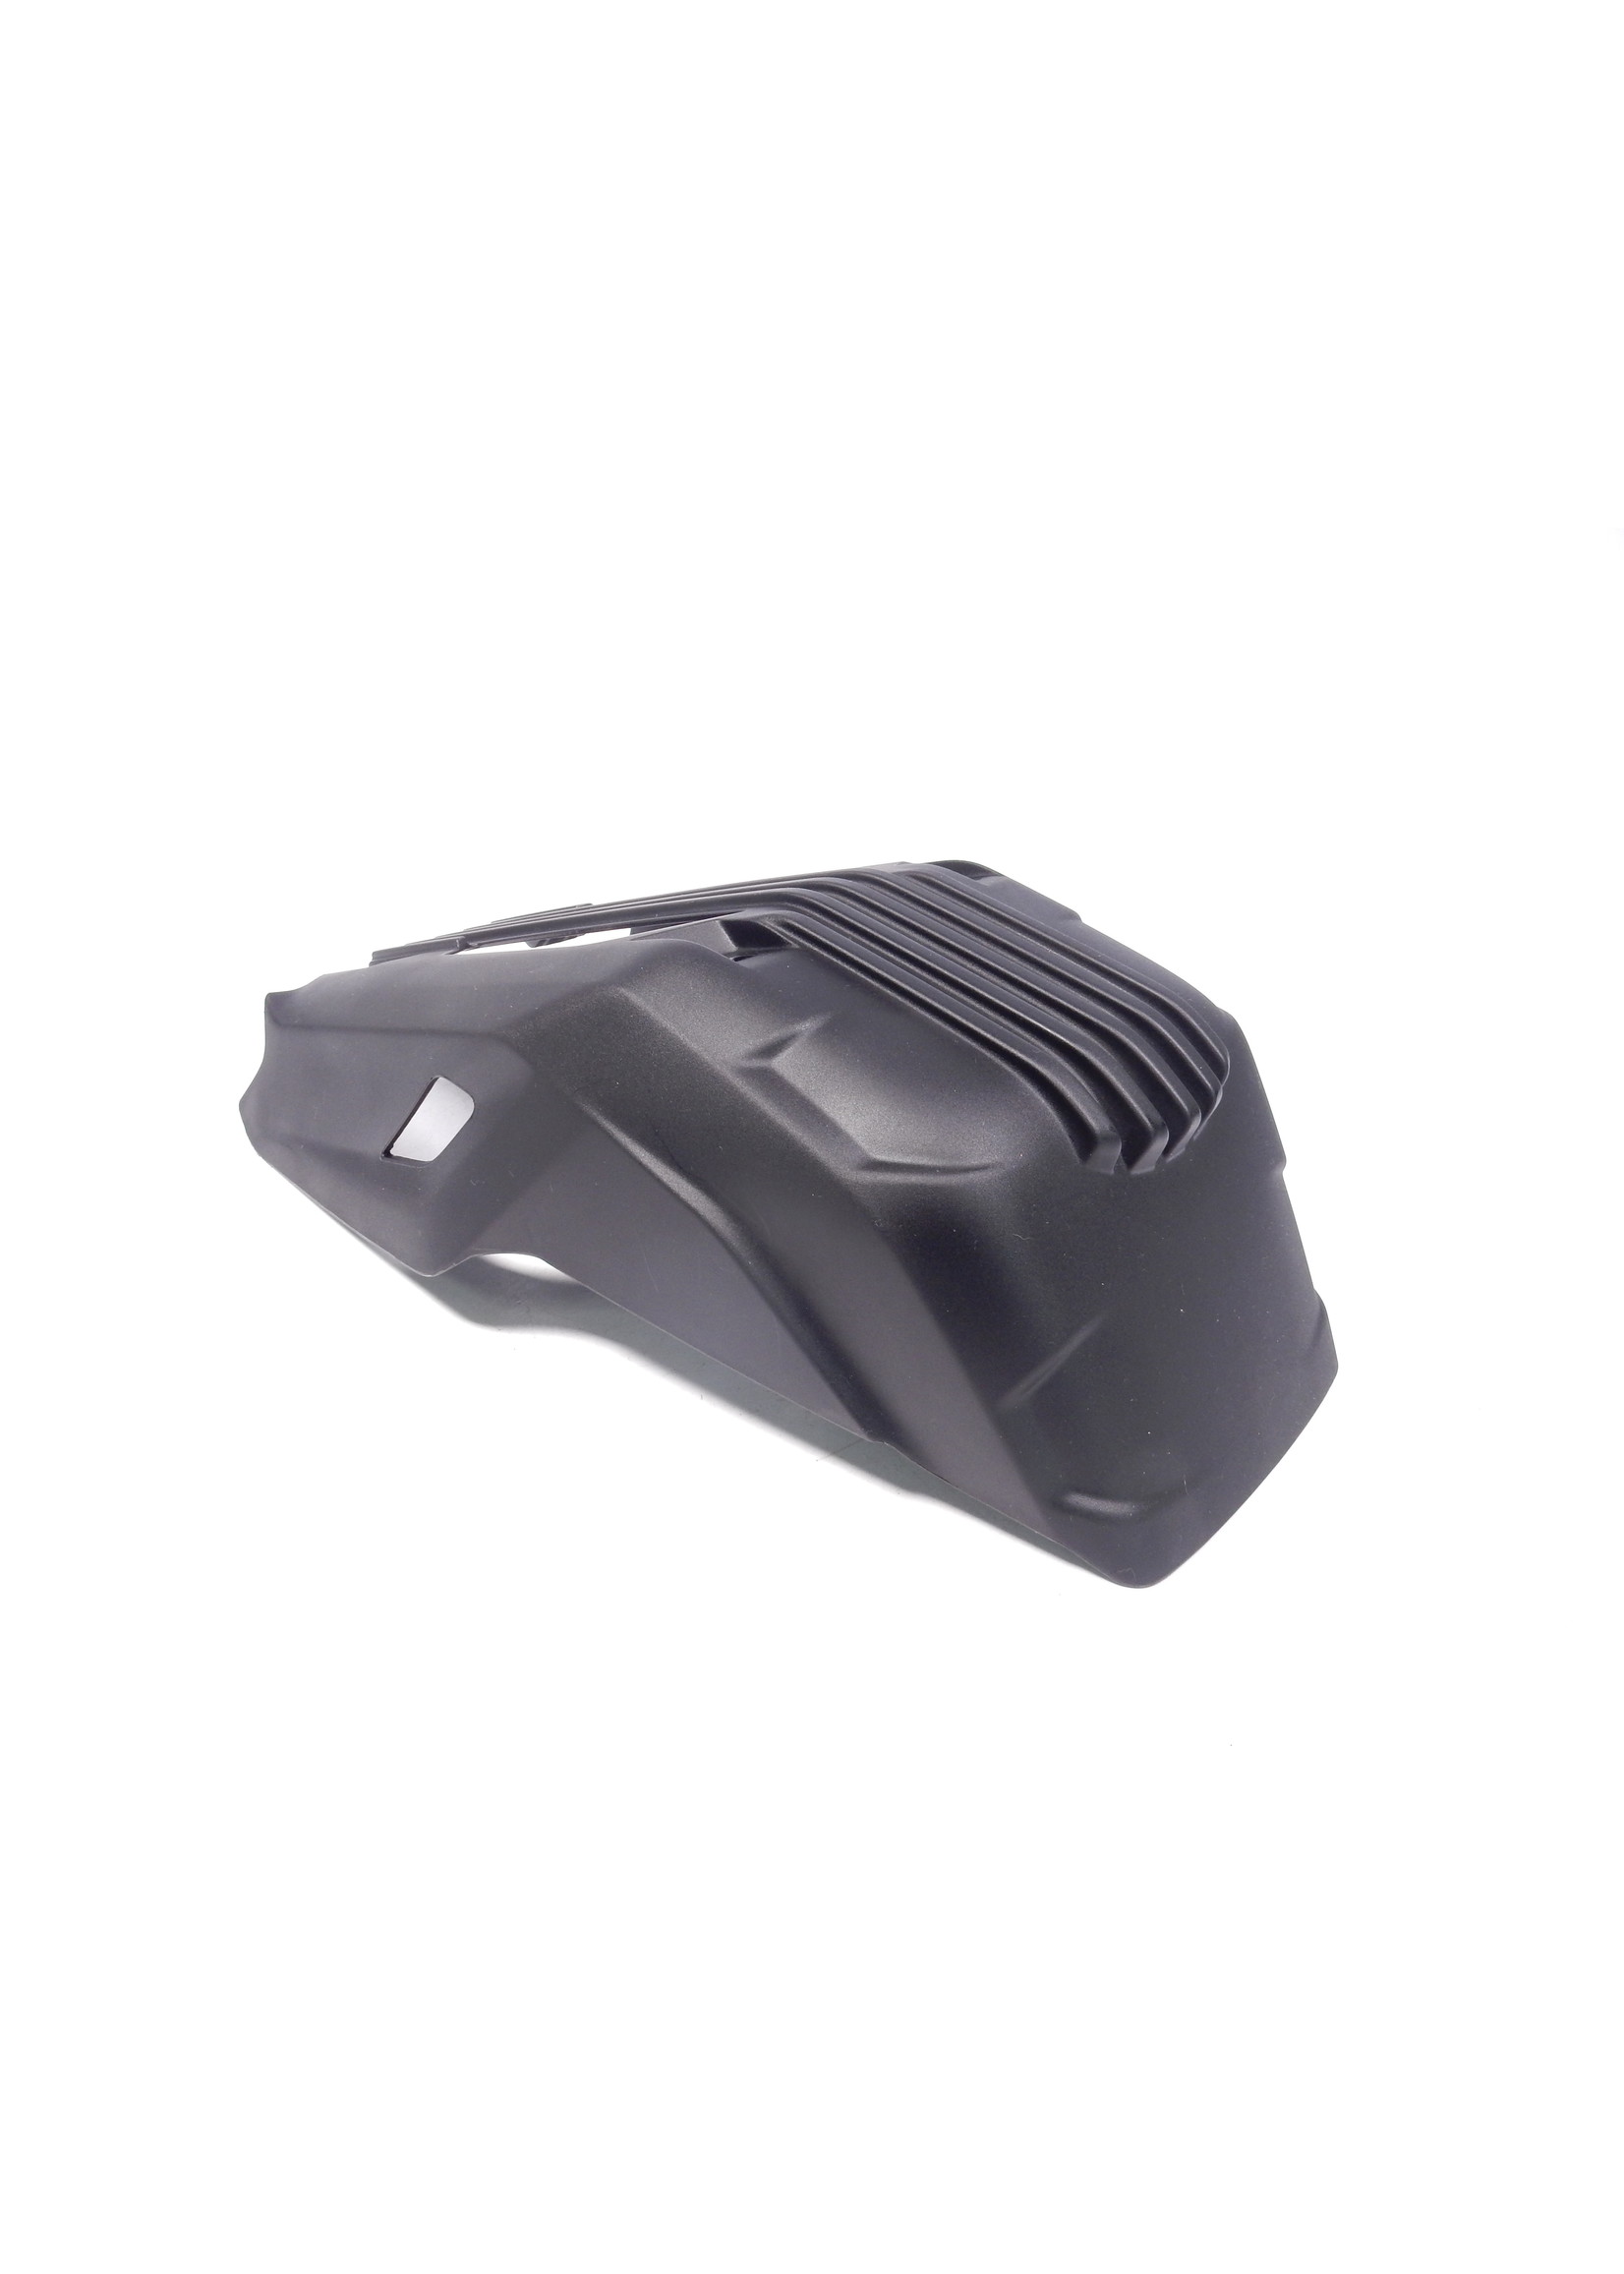 BMW BMW G 310 GS Underride protection / 46638560410